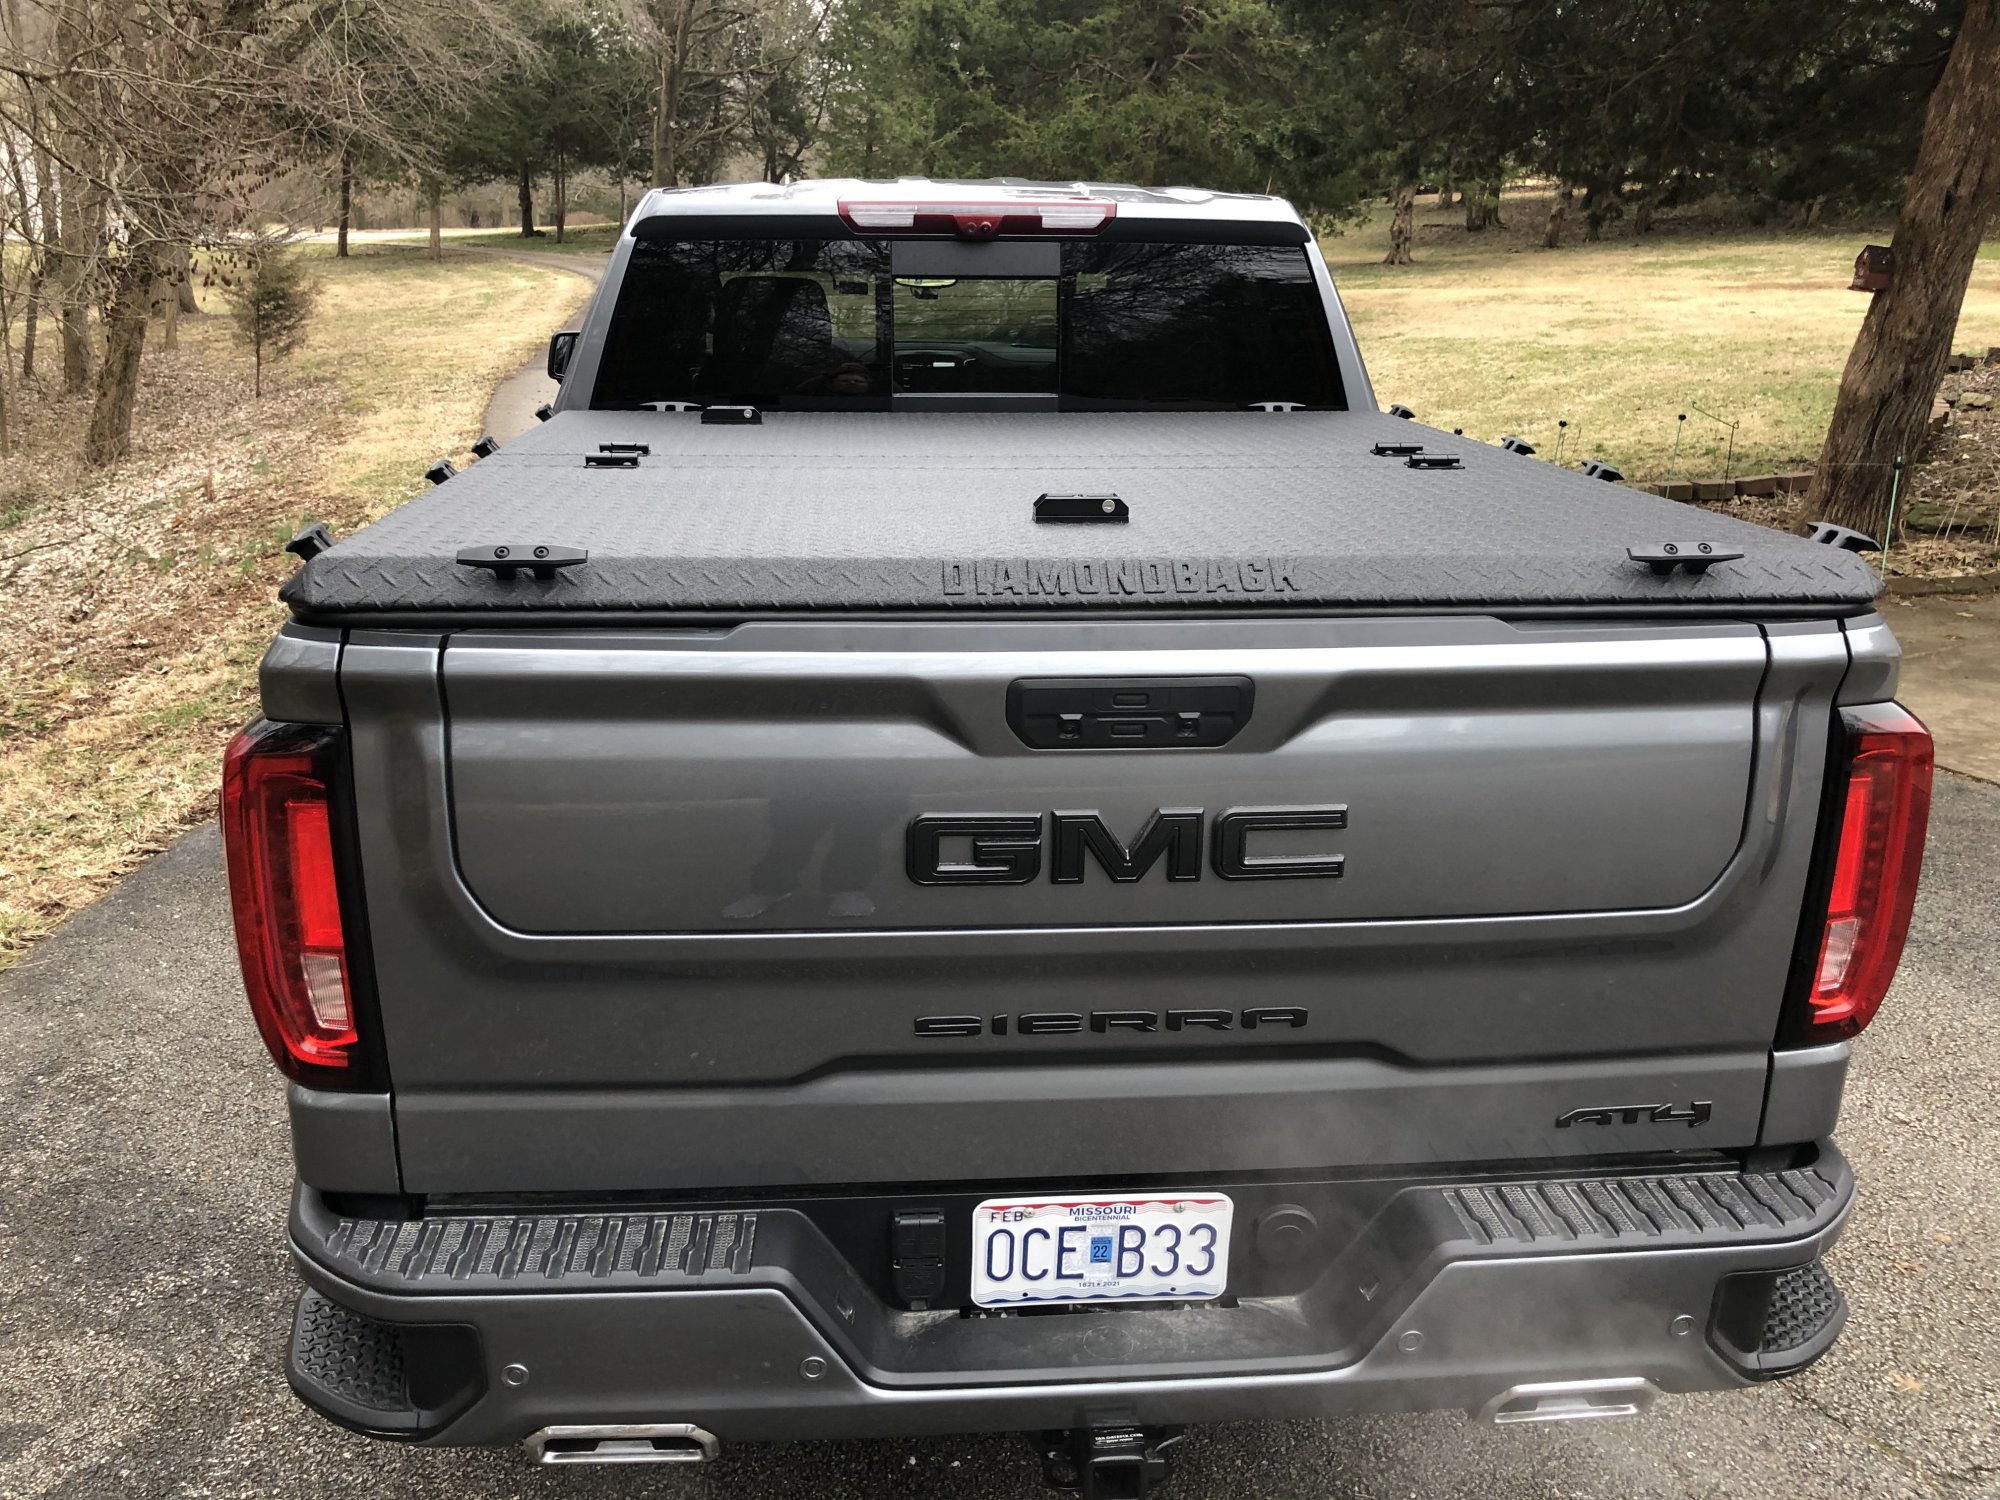 What's So Great About the Rev Tonneau Cover?